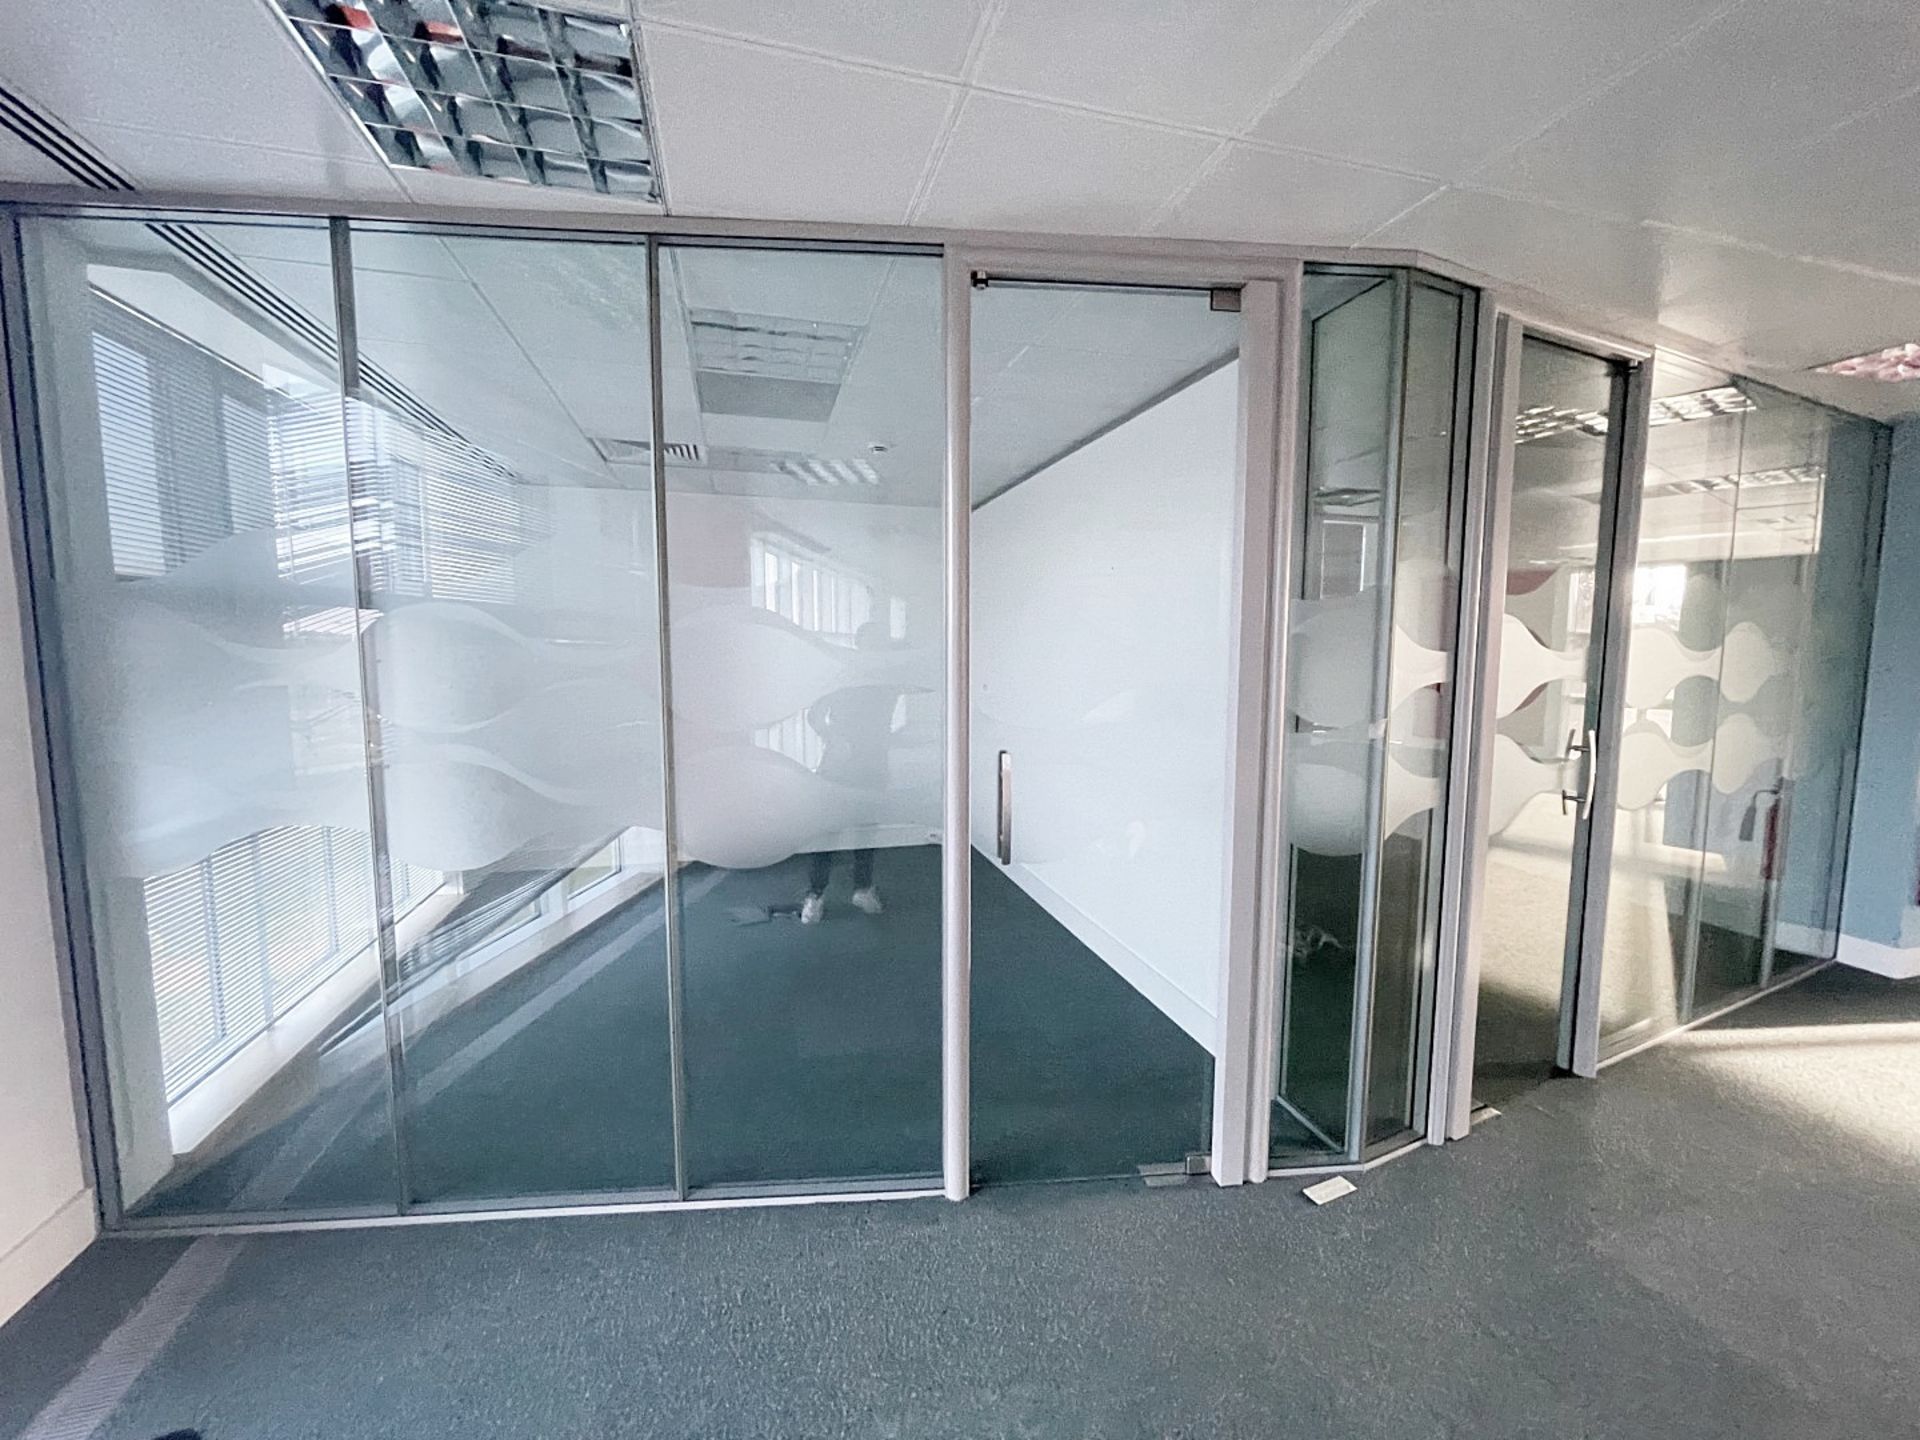 12 x Assorted Glass Partition Panels And Doors - Covers An Area Of 7.3 Metres Across, Height - Image 3 of 7